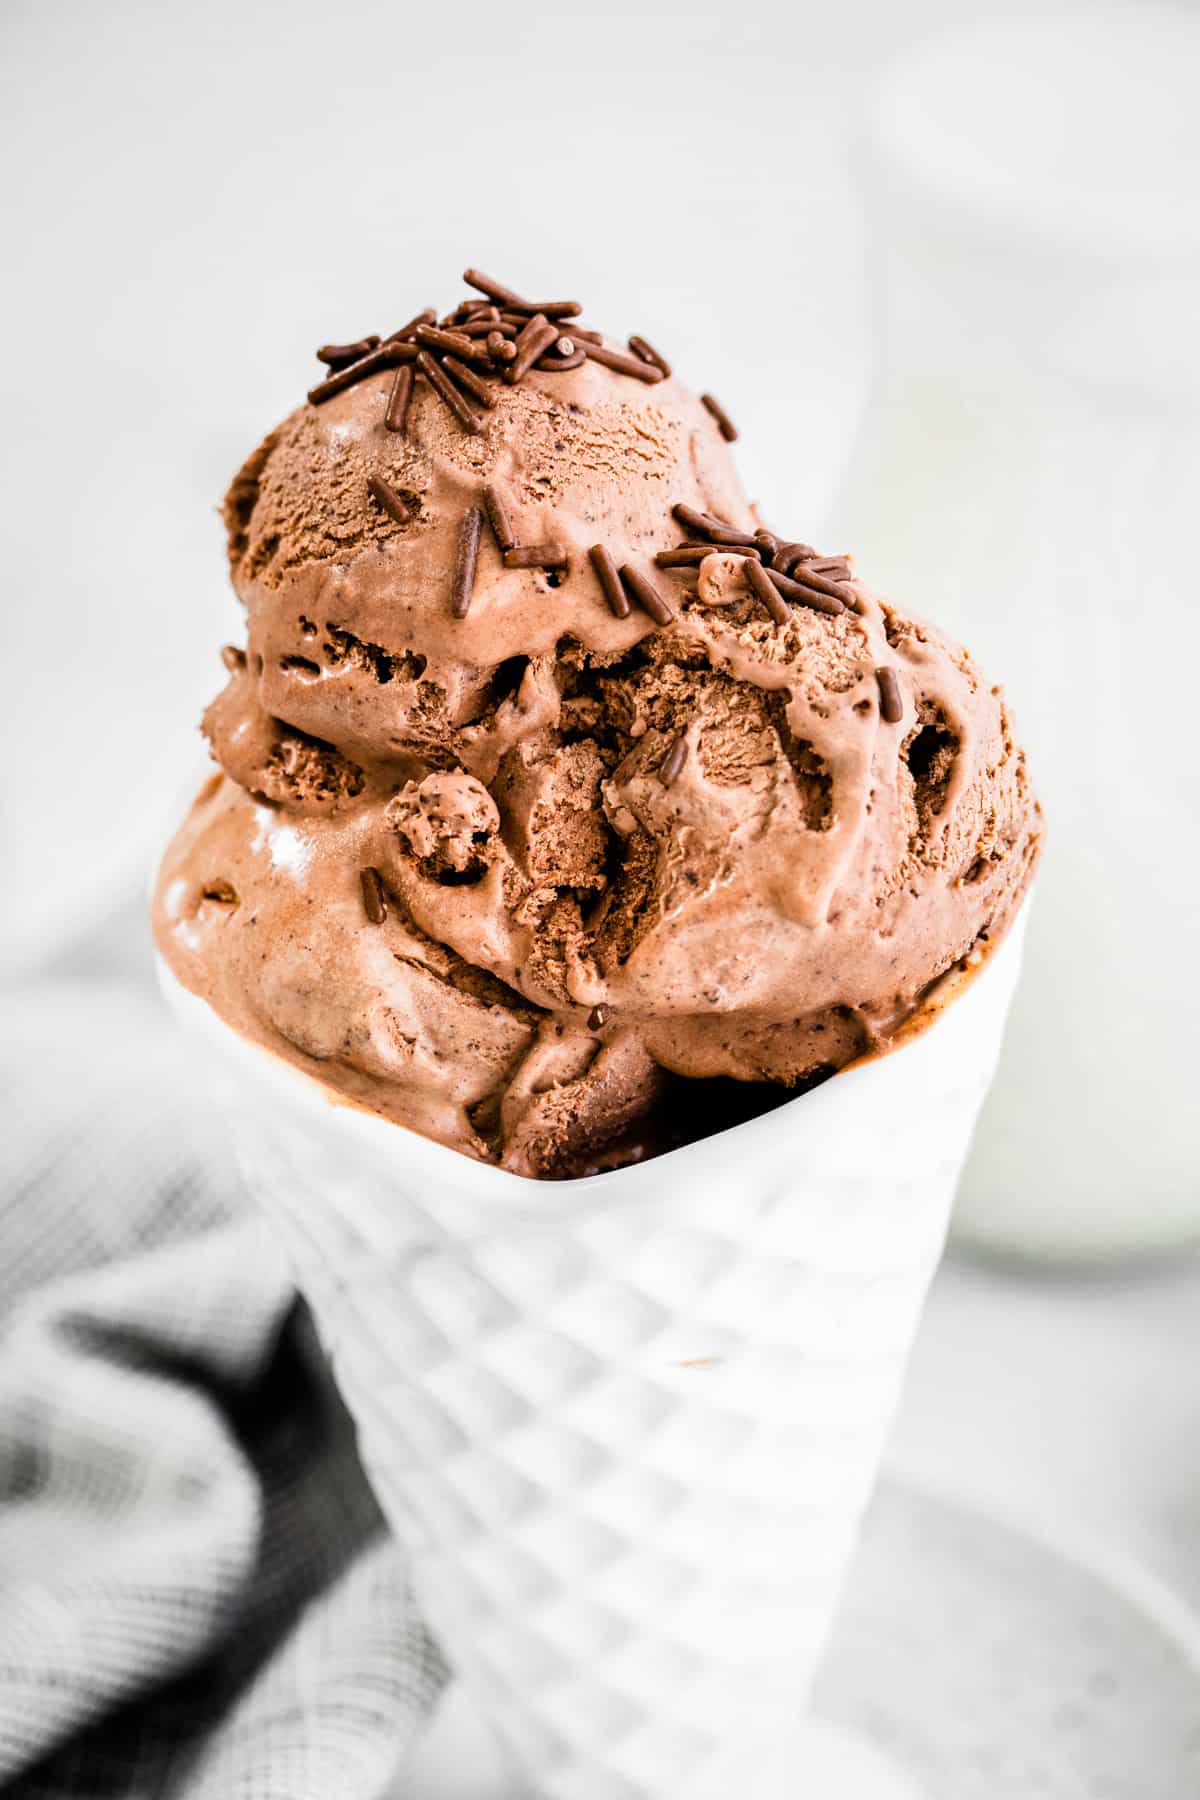 Homemade chocolate ice cream with chocolate sprinkles in white cone bowl